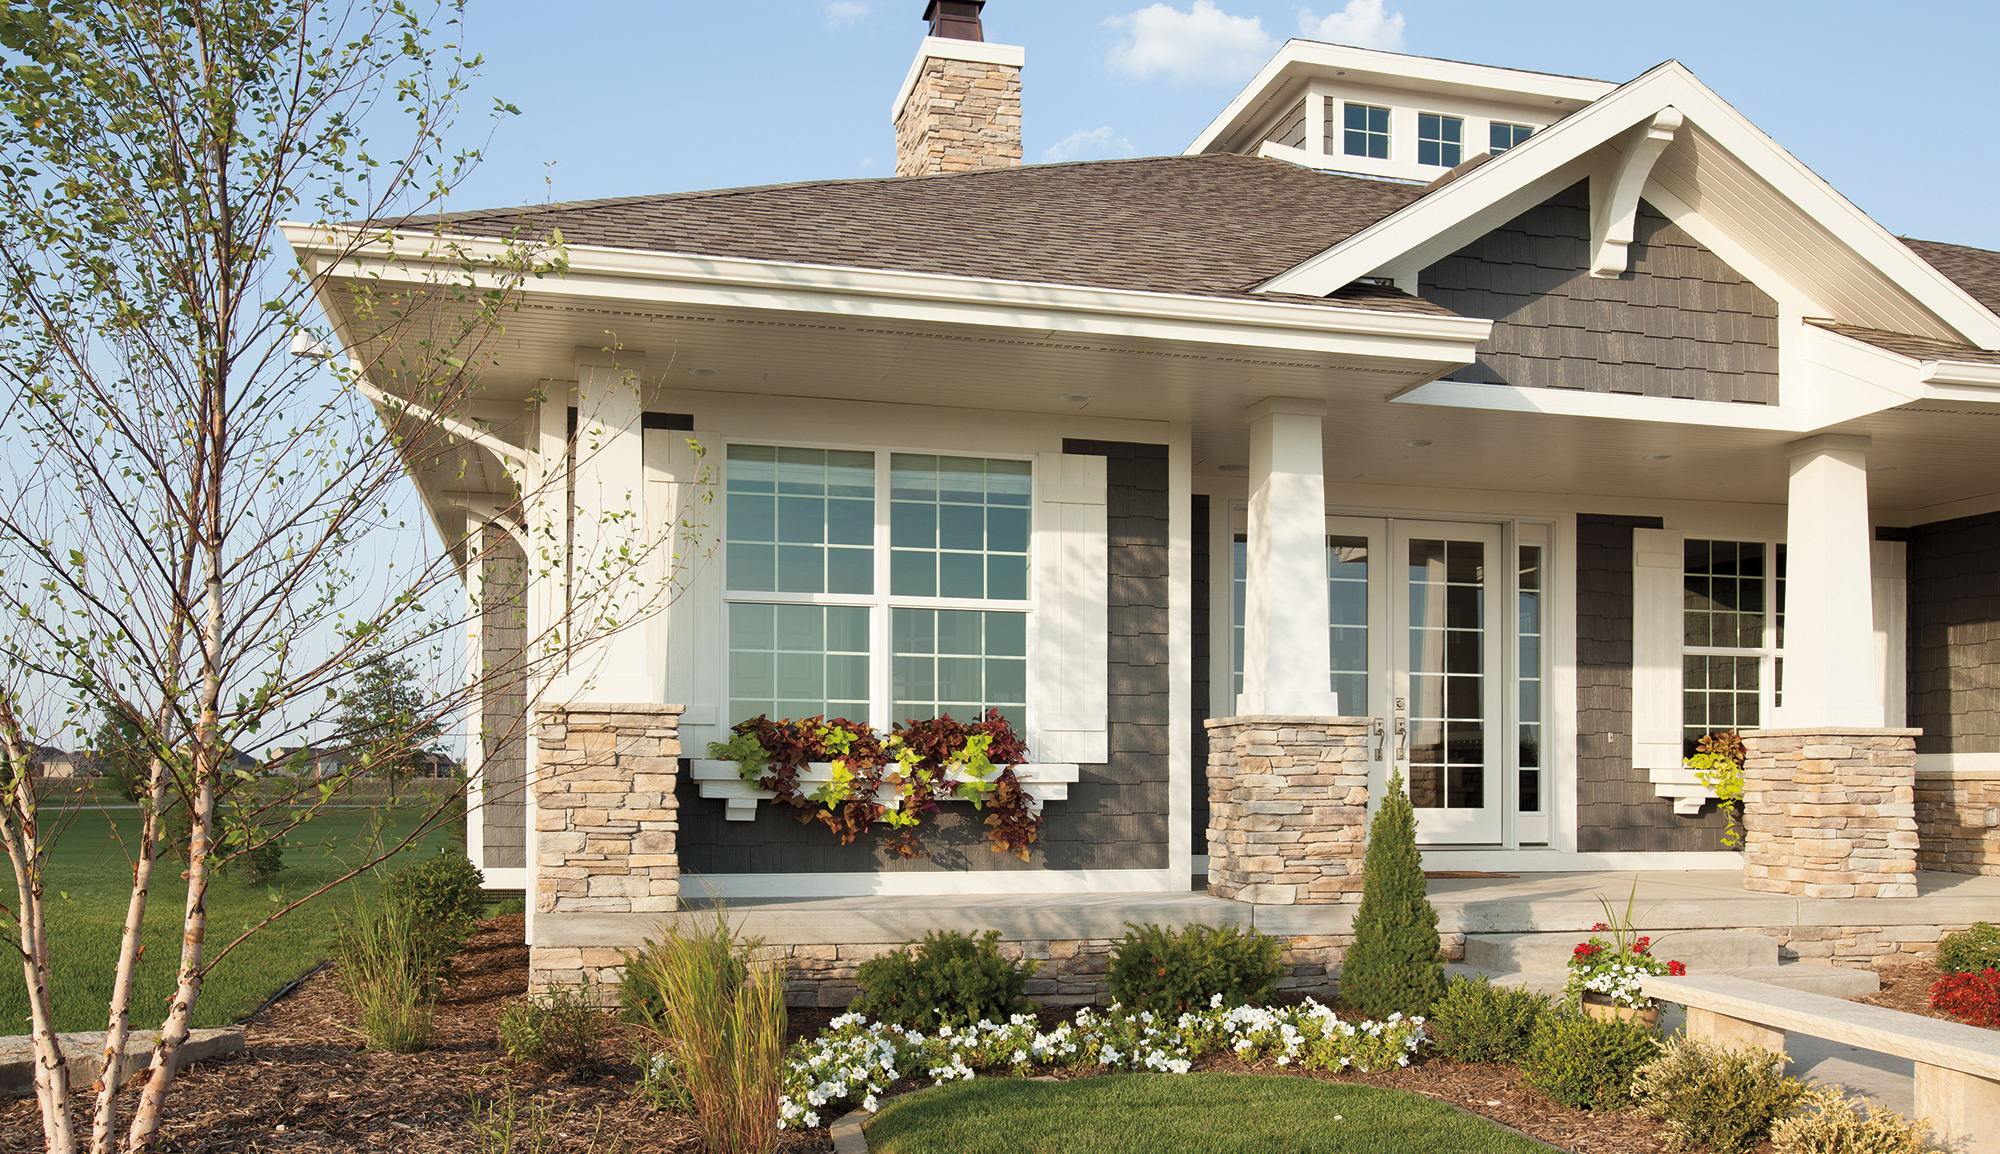 Home Exterior Remodeling Contractor in Rochester Hills, MI